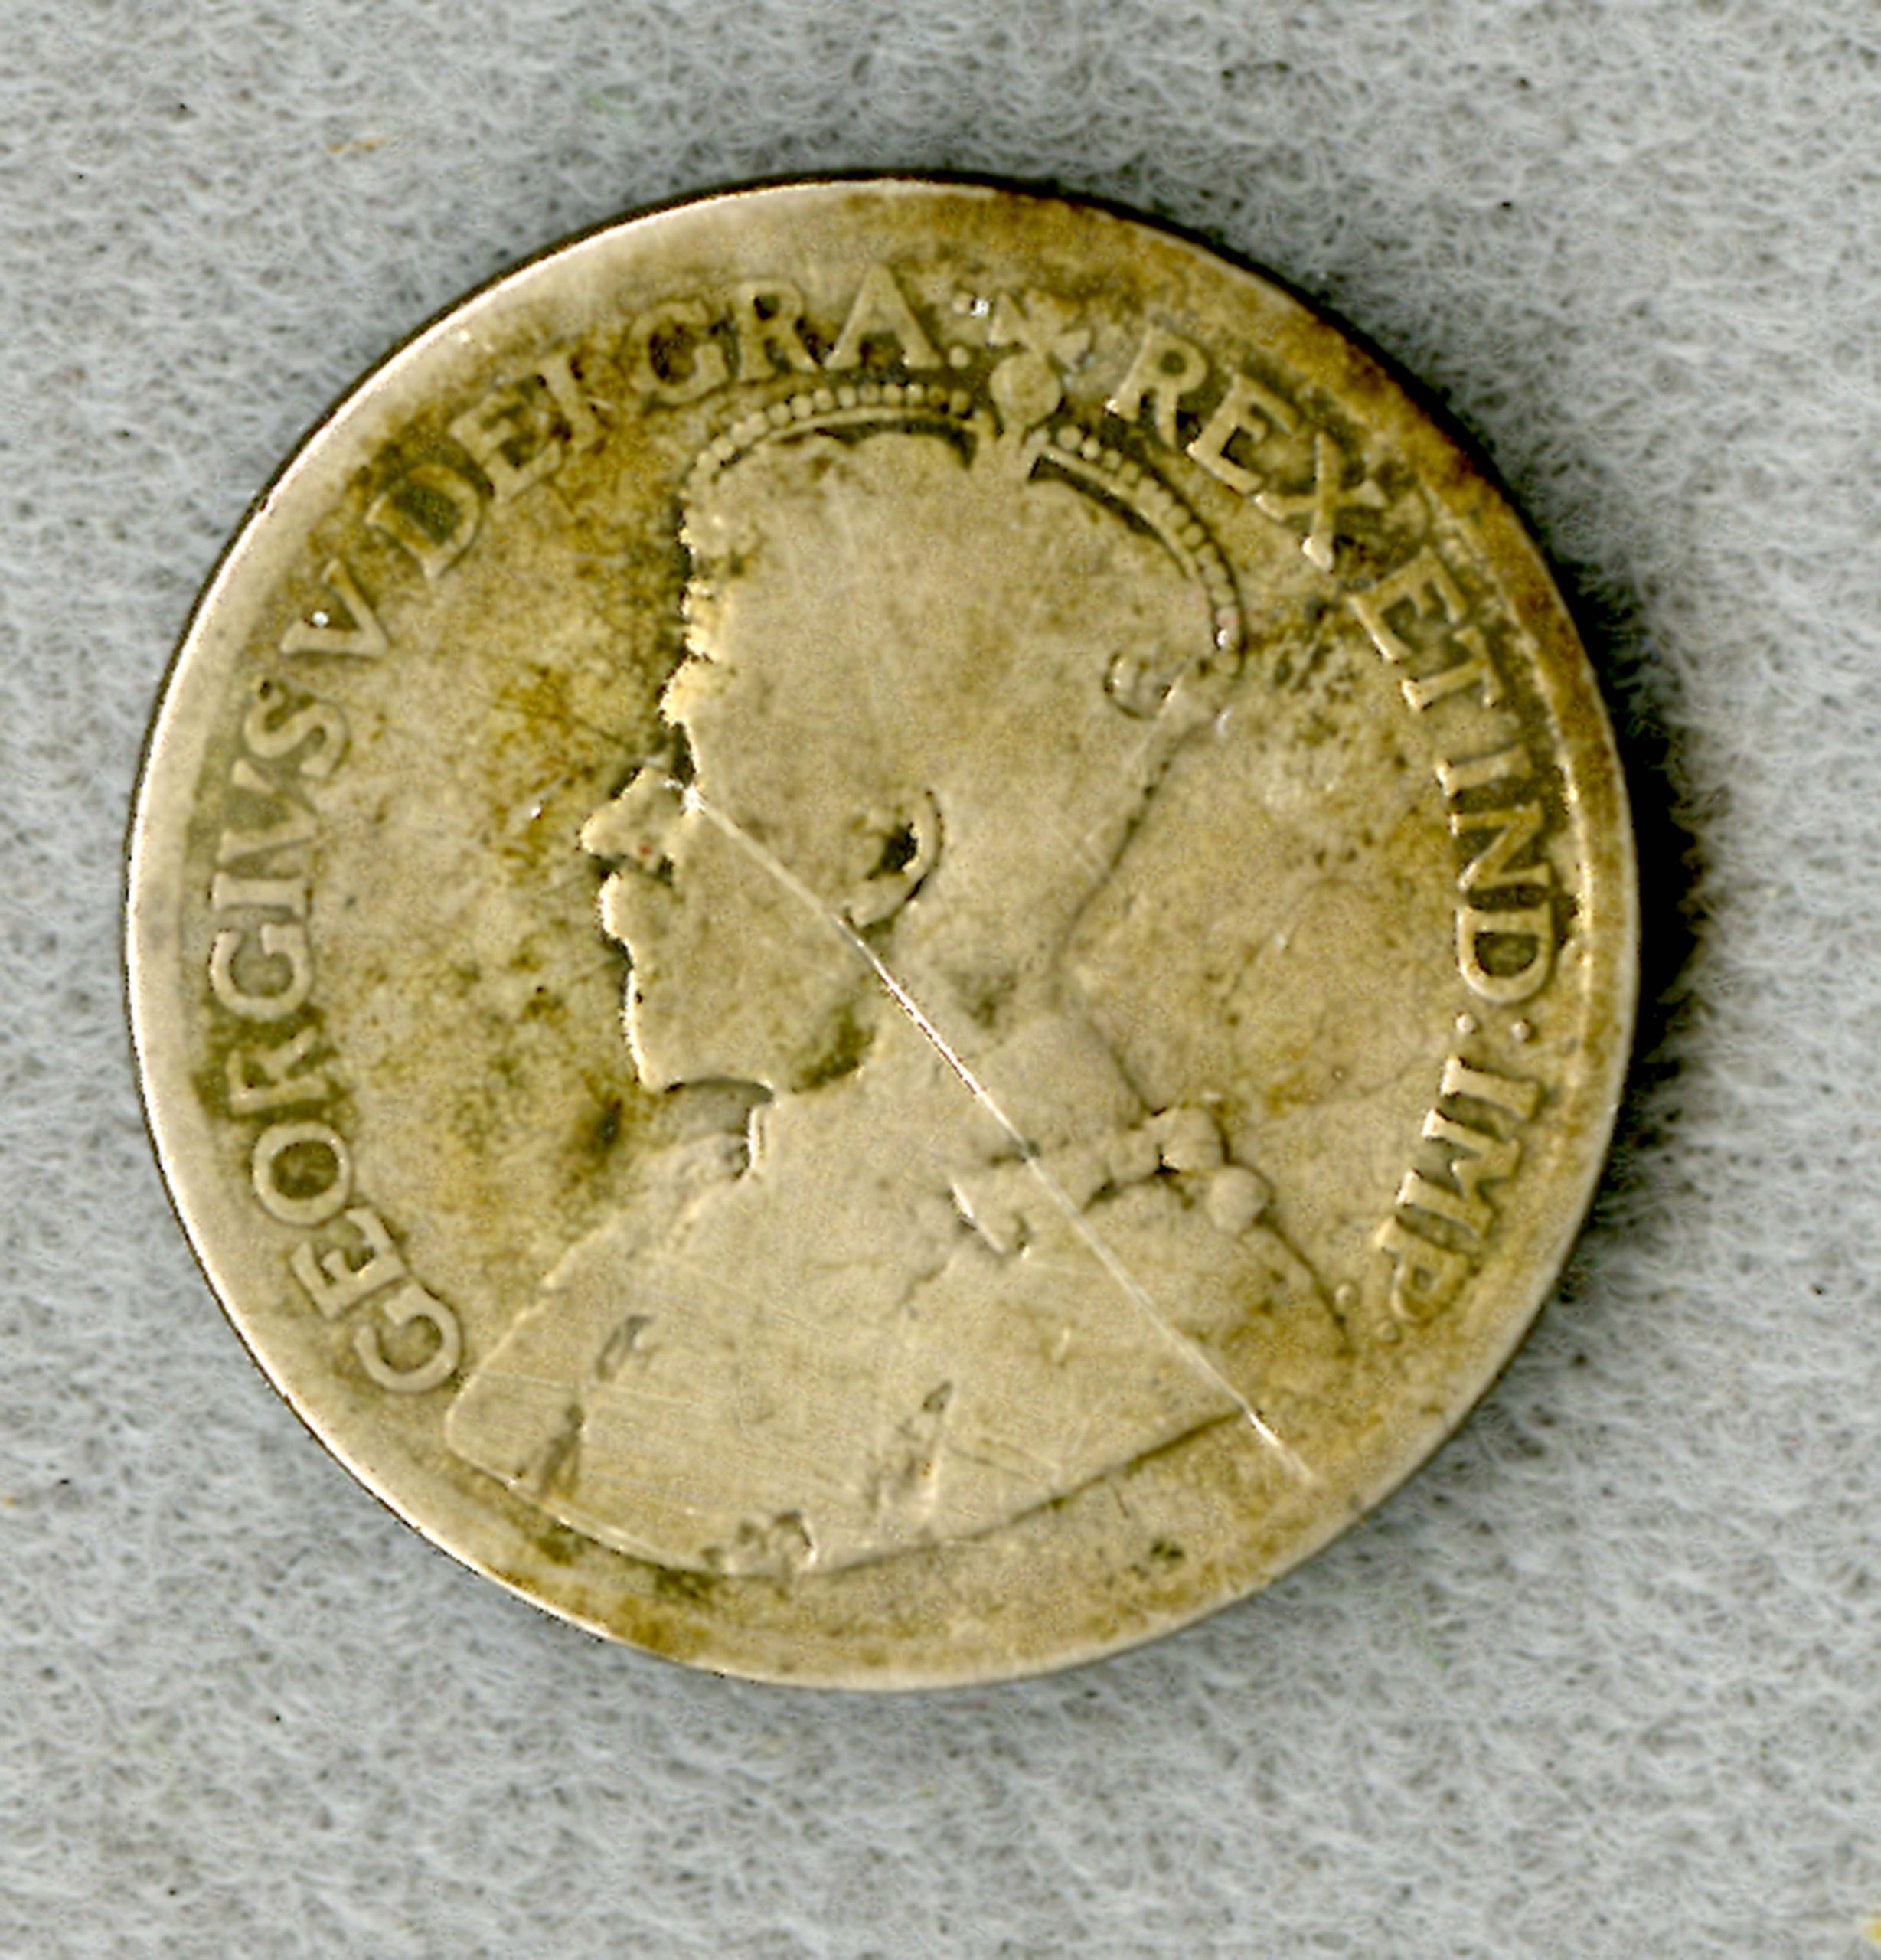 Gold coin with image of King George V